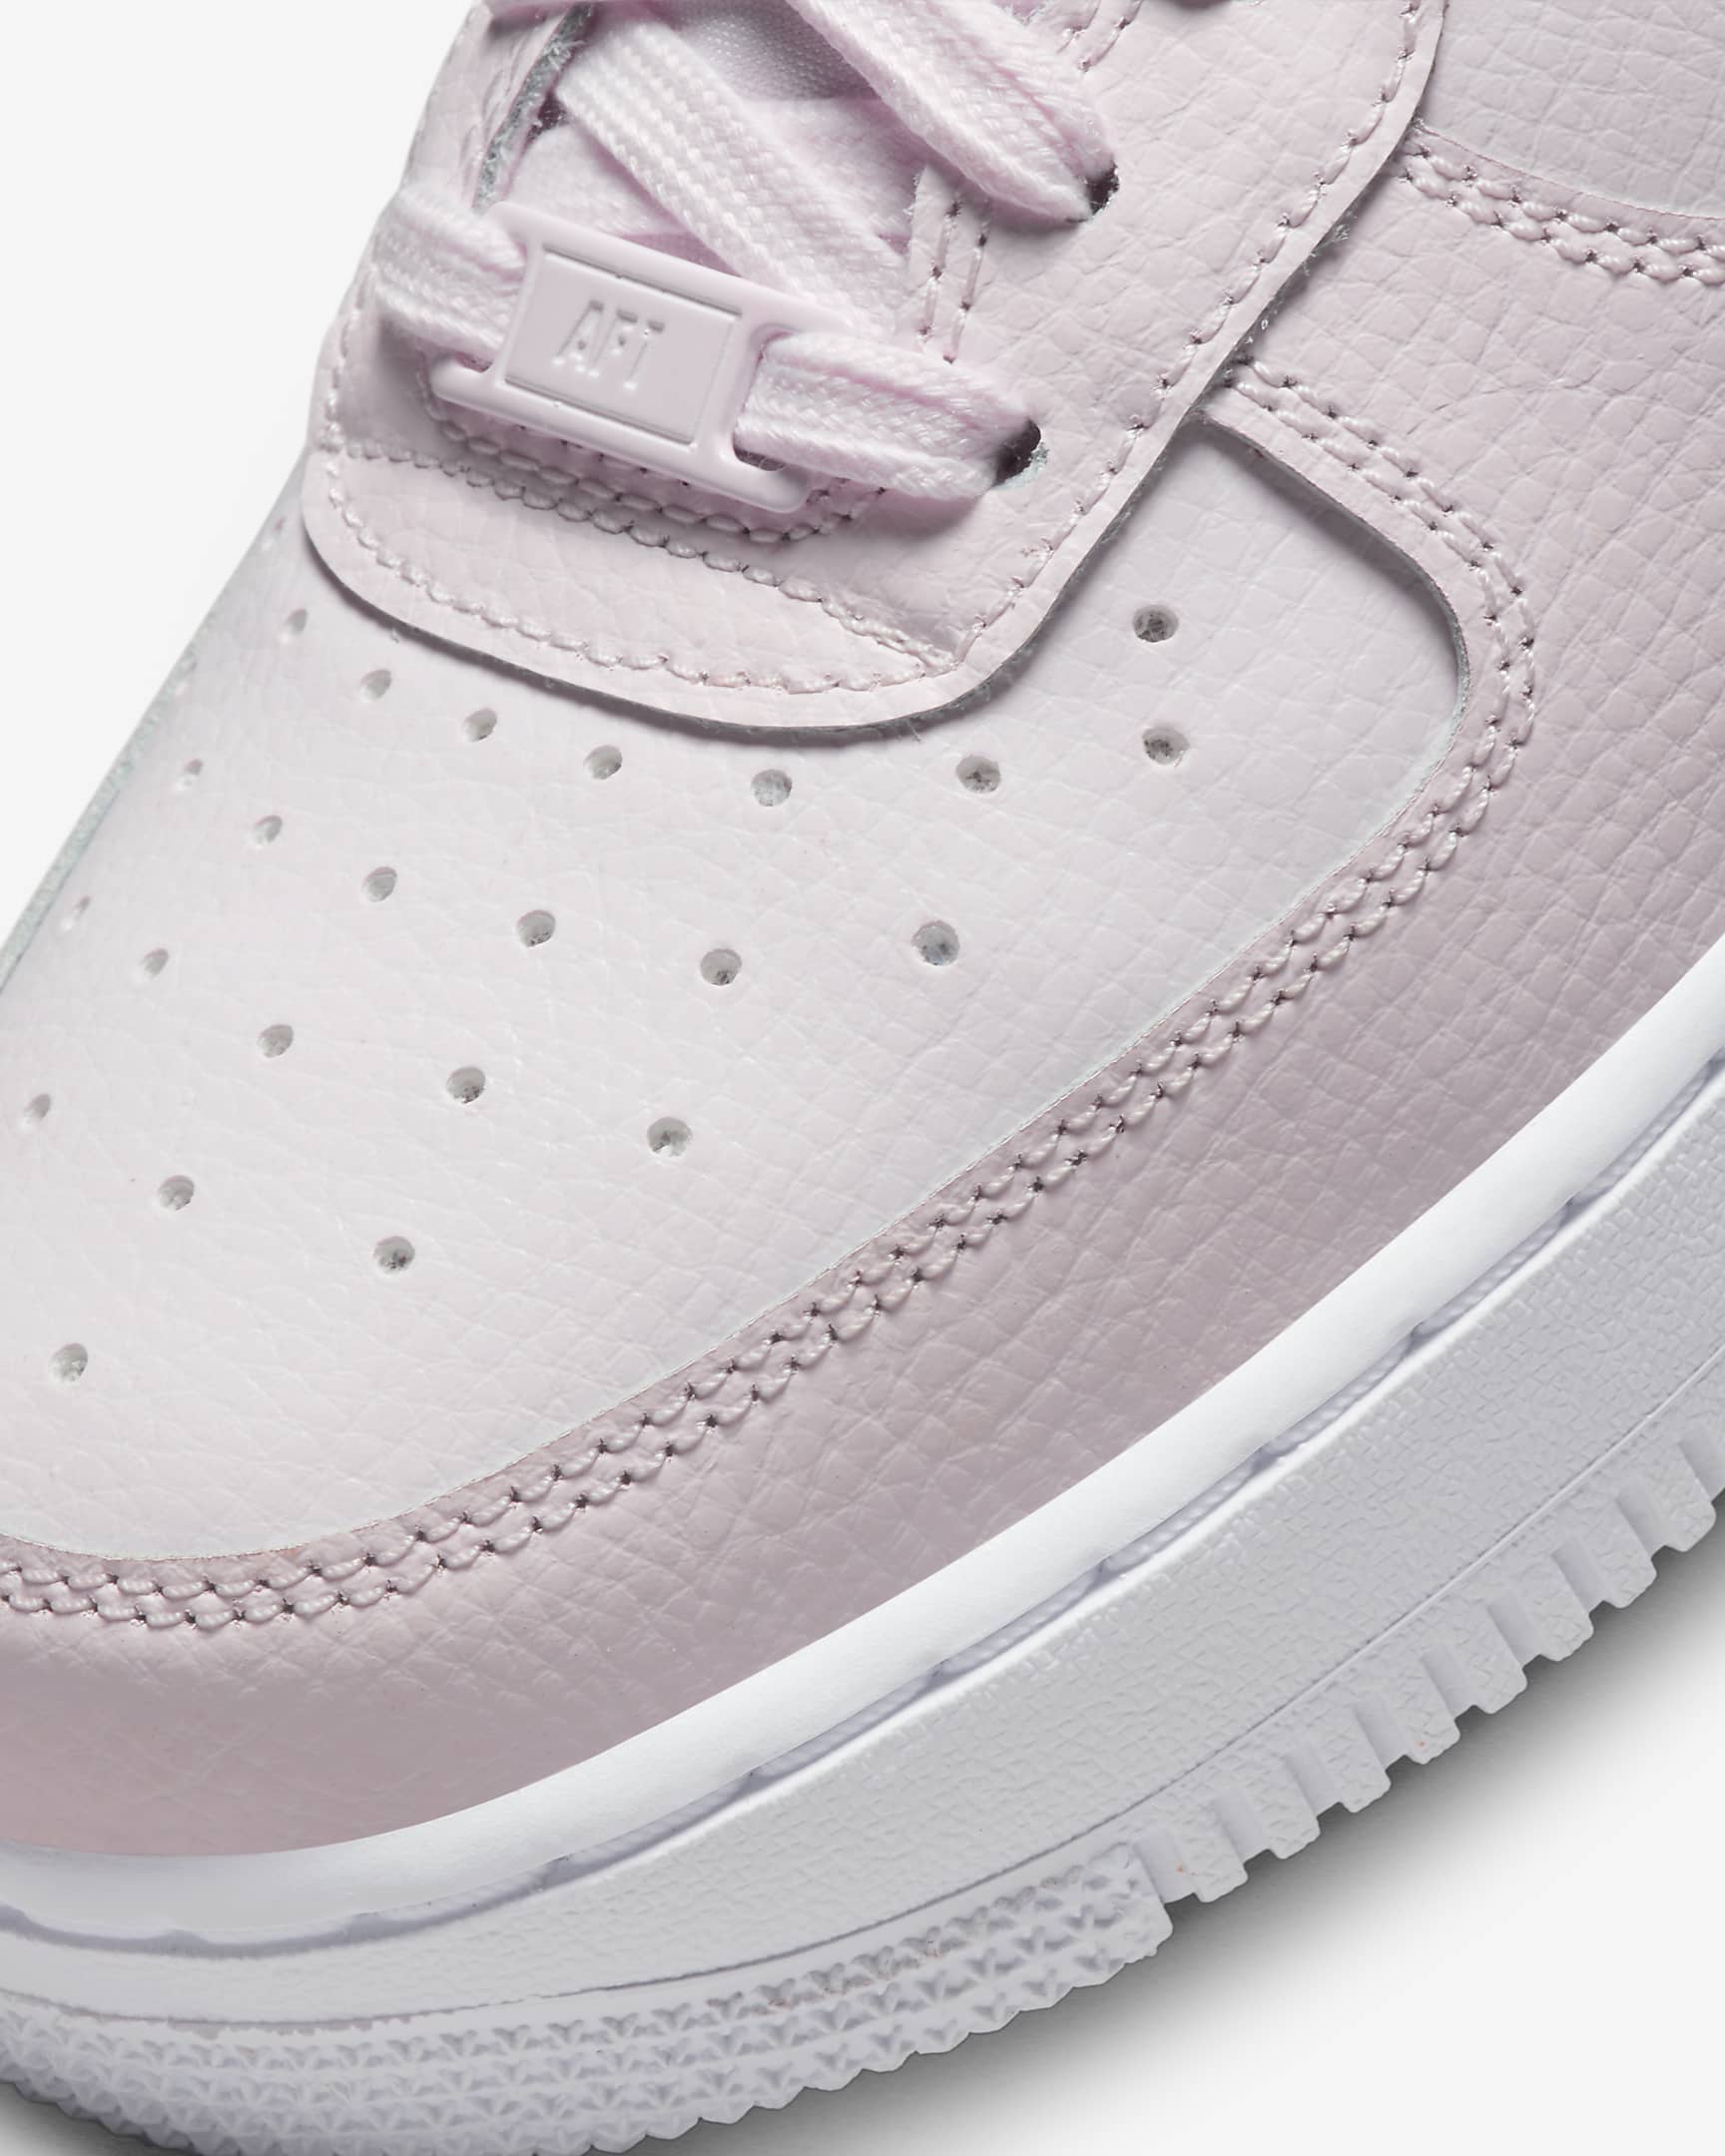 Nike Air Force 1 '07 Women's Shoes - Pearl Pink/White/Pearl Pink/Coral Chalk